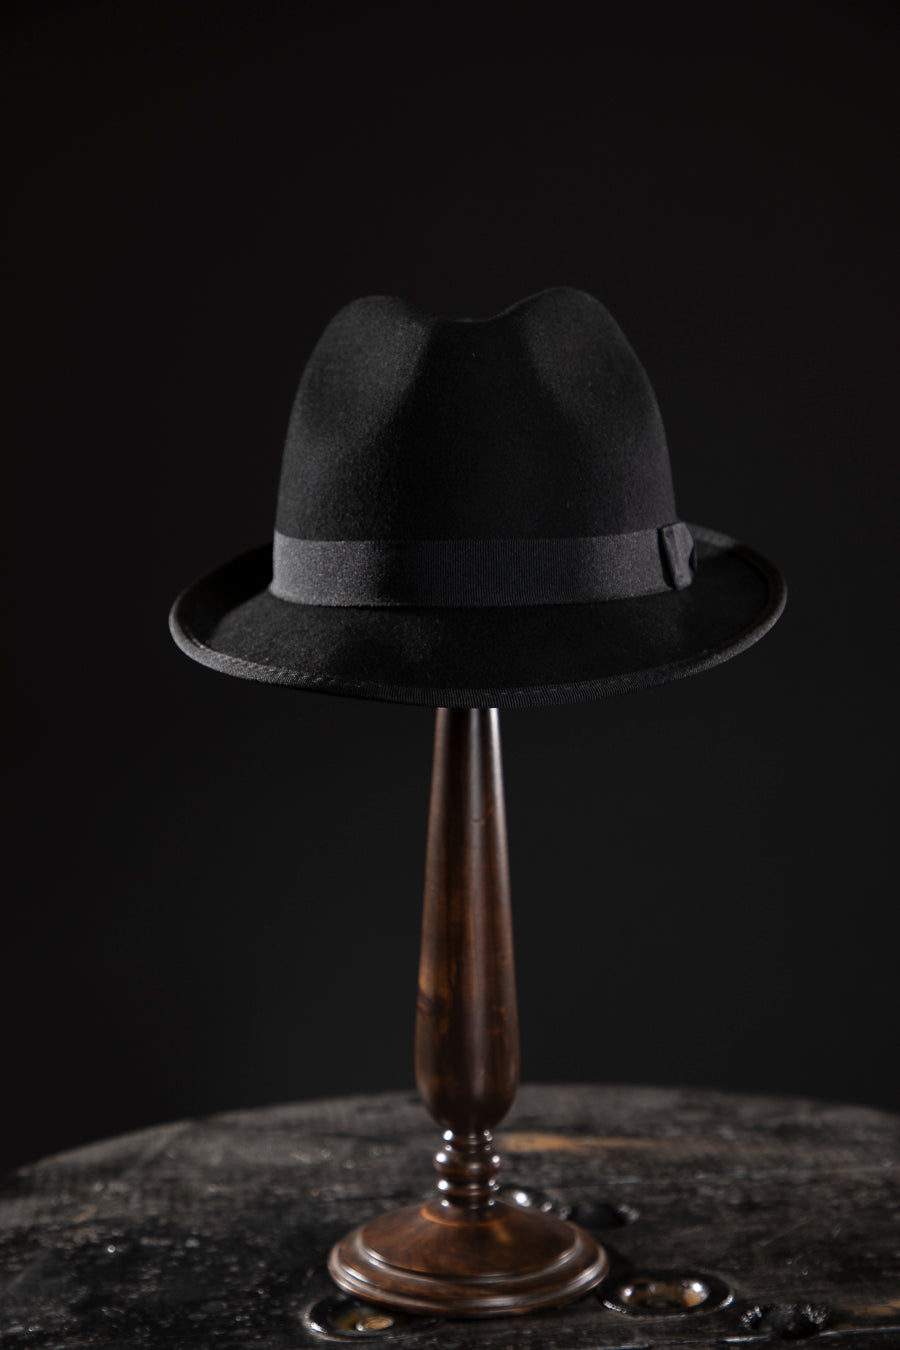 Deluxe, high quality hats for men and women. Our collection of hats including wool felt top hats, fedoras, bowlers, caps, fedoras, trilbys, cloches and more are a wonderful addition to a 1920s Gangster or Gatsby costume, or the perfect fashion accessory. Shop online, or visit our Mornington hat store to see all that we have to offer.